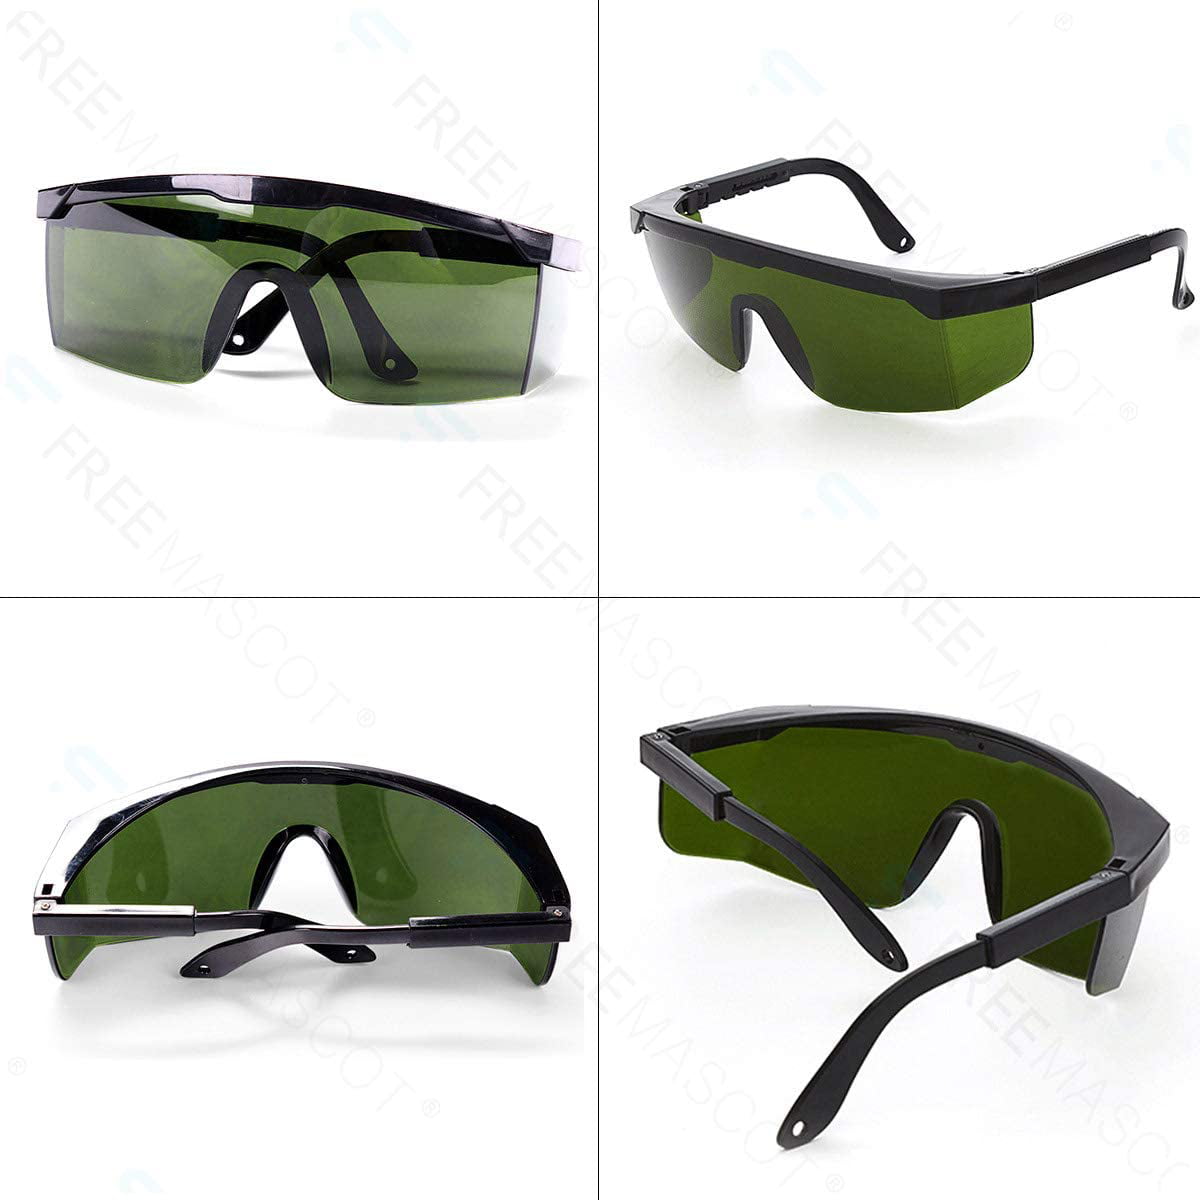 IPL 200nm-2000nm Laser Safety Glasses for Laser Hair Removal Treatment 